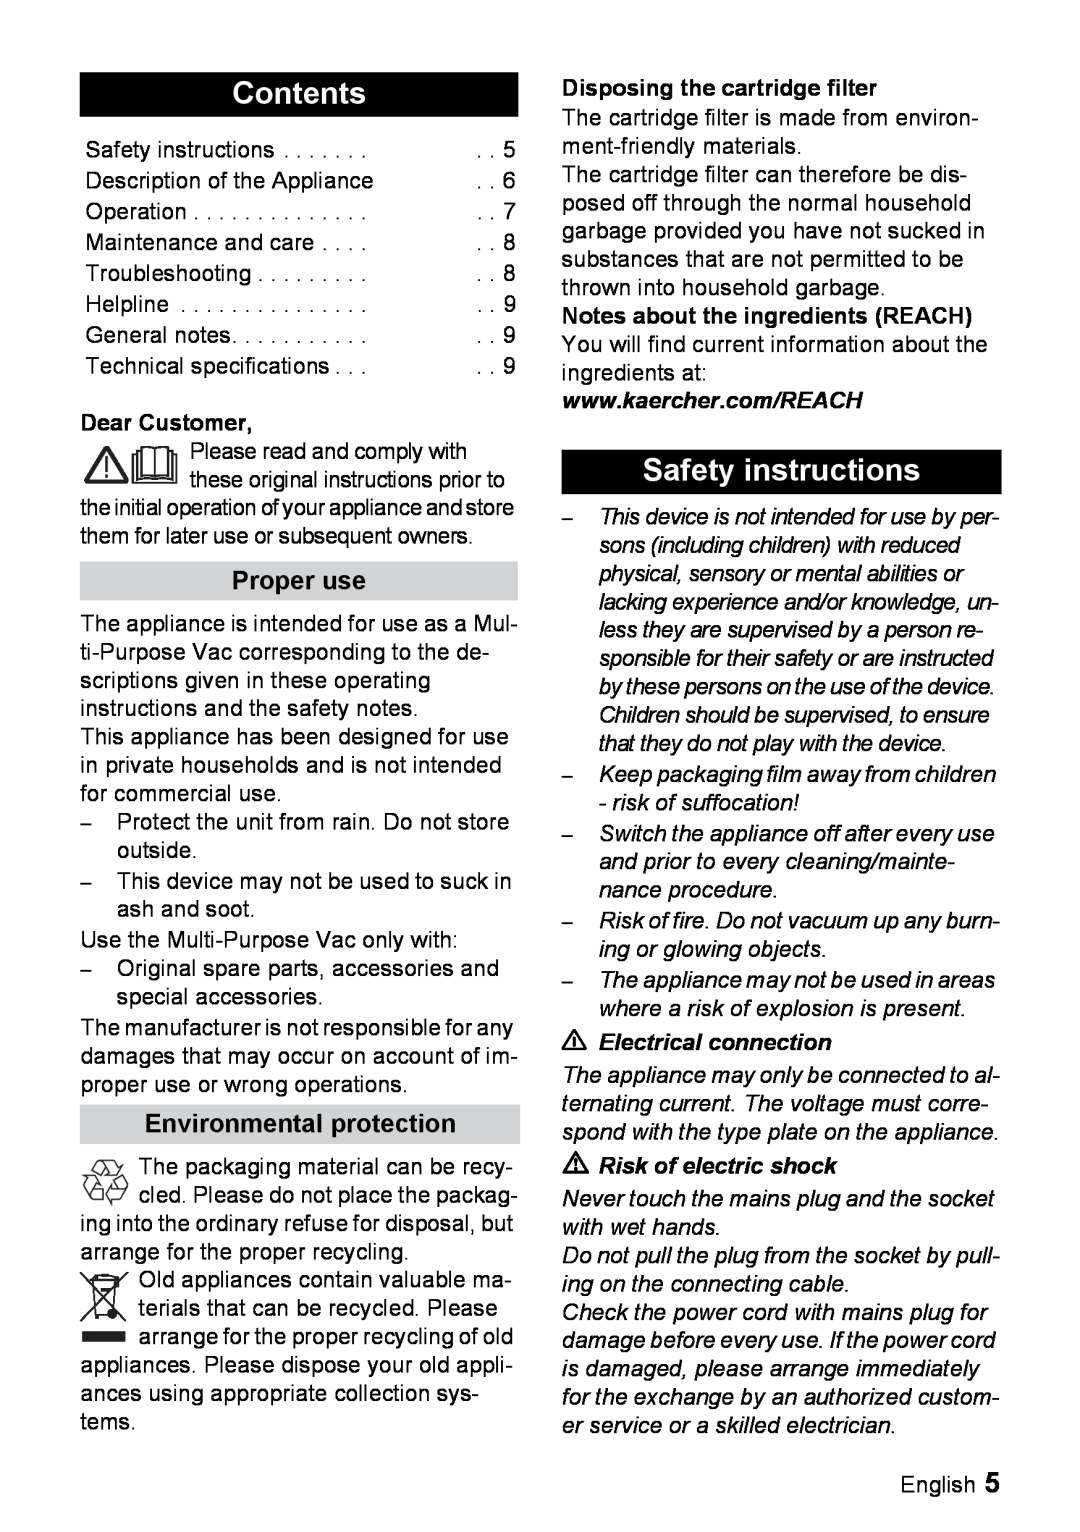 Karcher WD 3.2XX manual Contents, Safety instructions, Proper use, Environmental protection, Electrical connection 